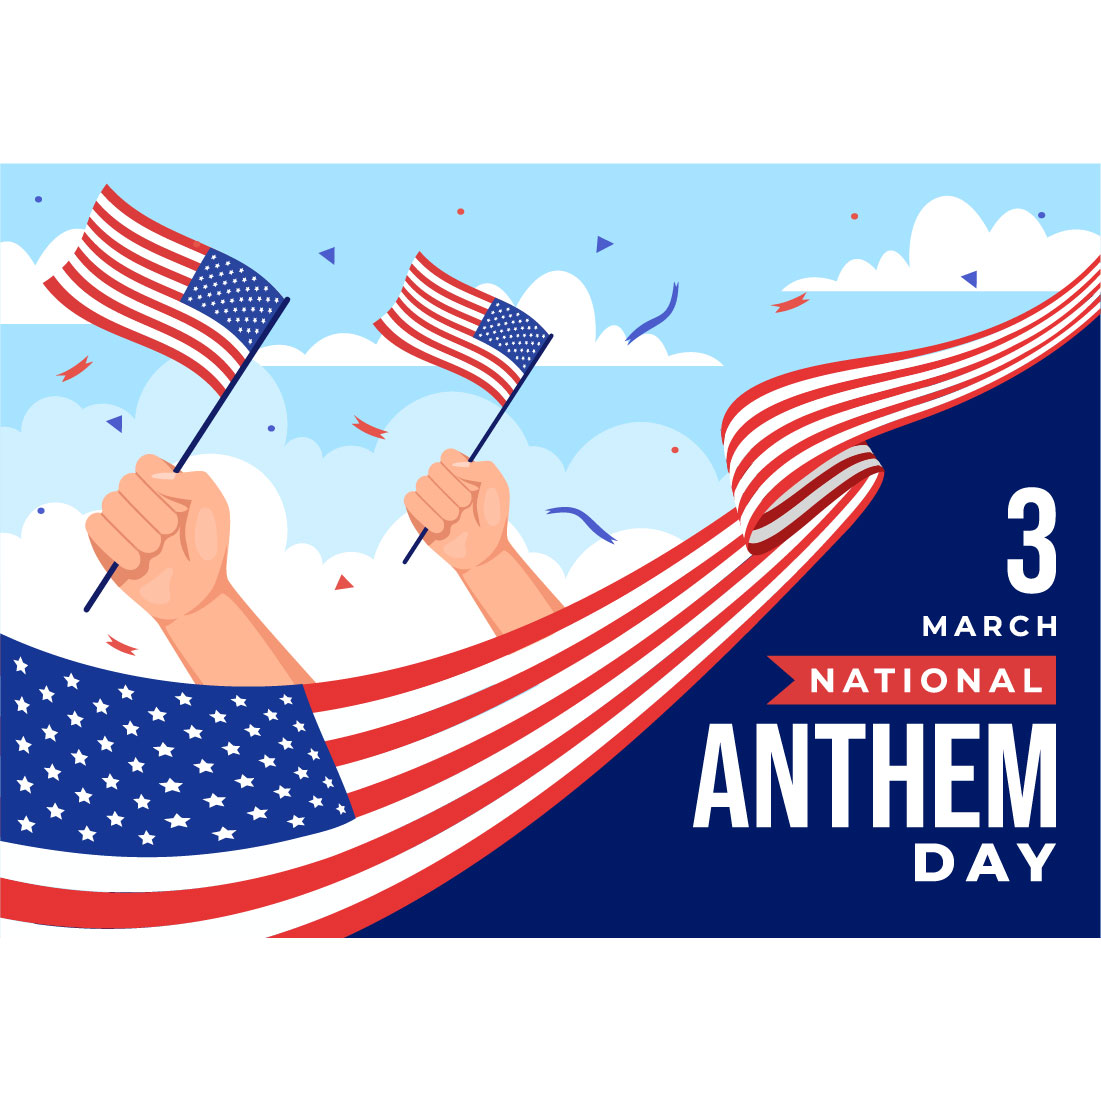 12 National Anthem Day Illustration preview image.